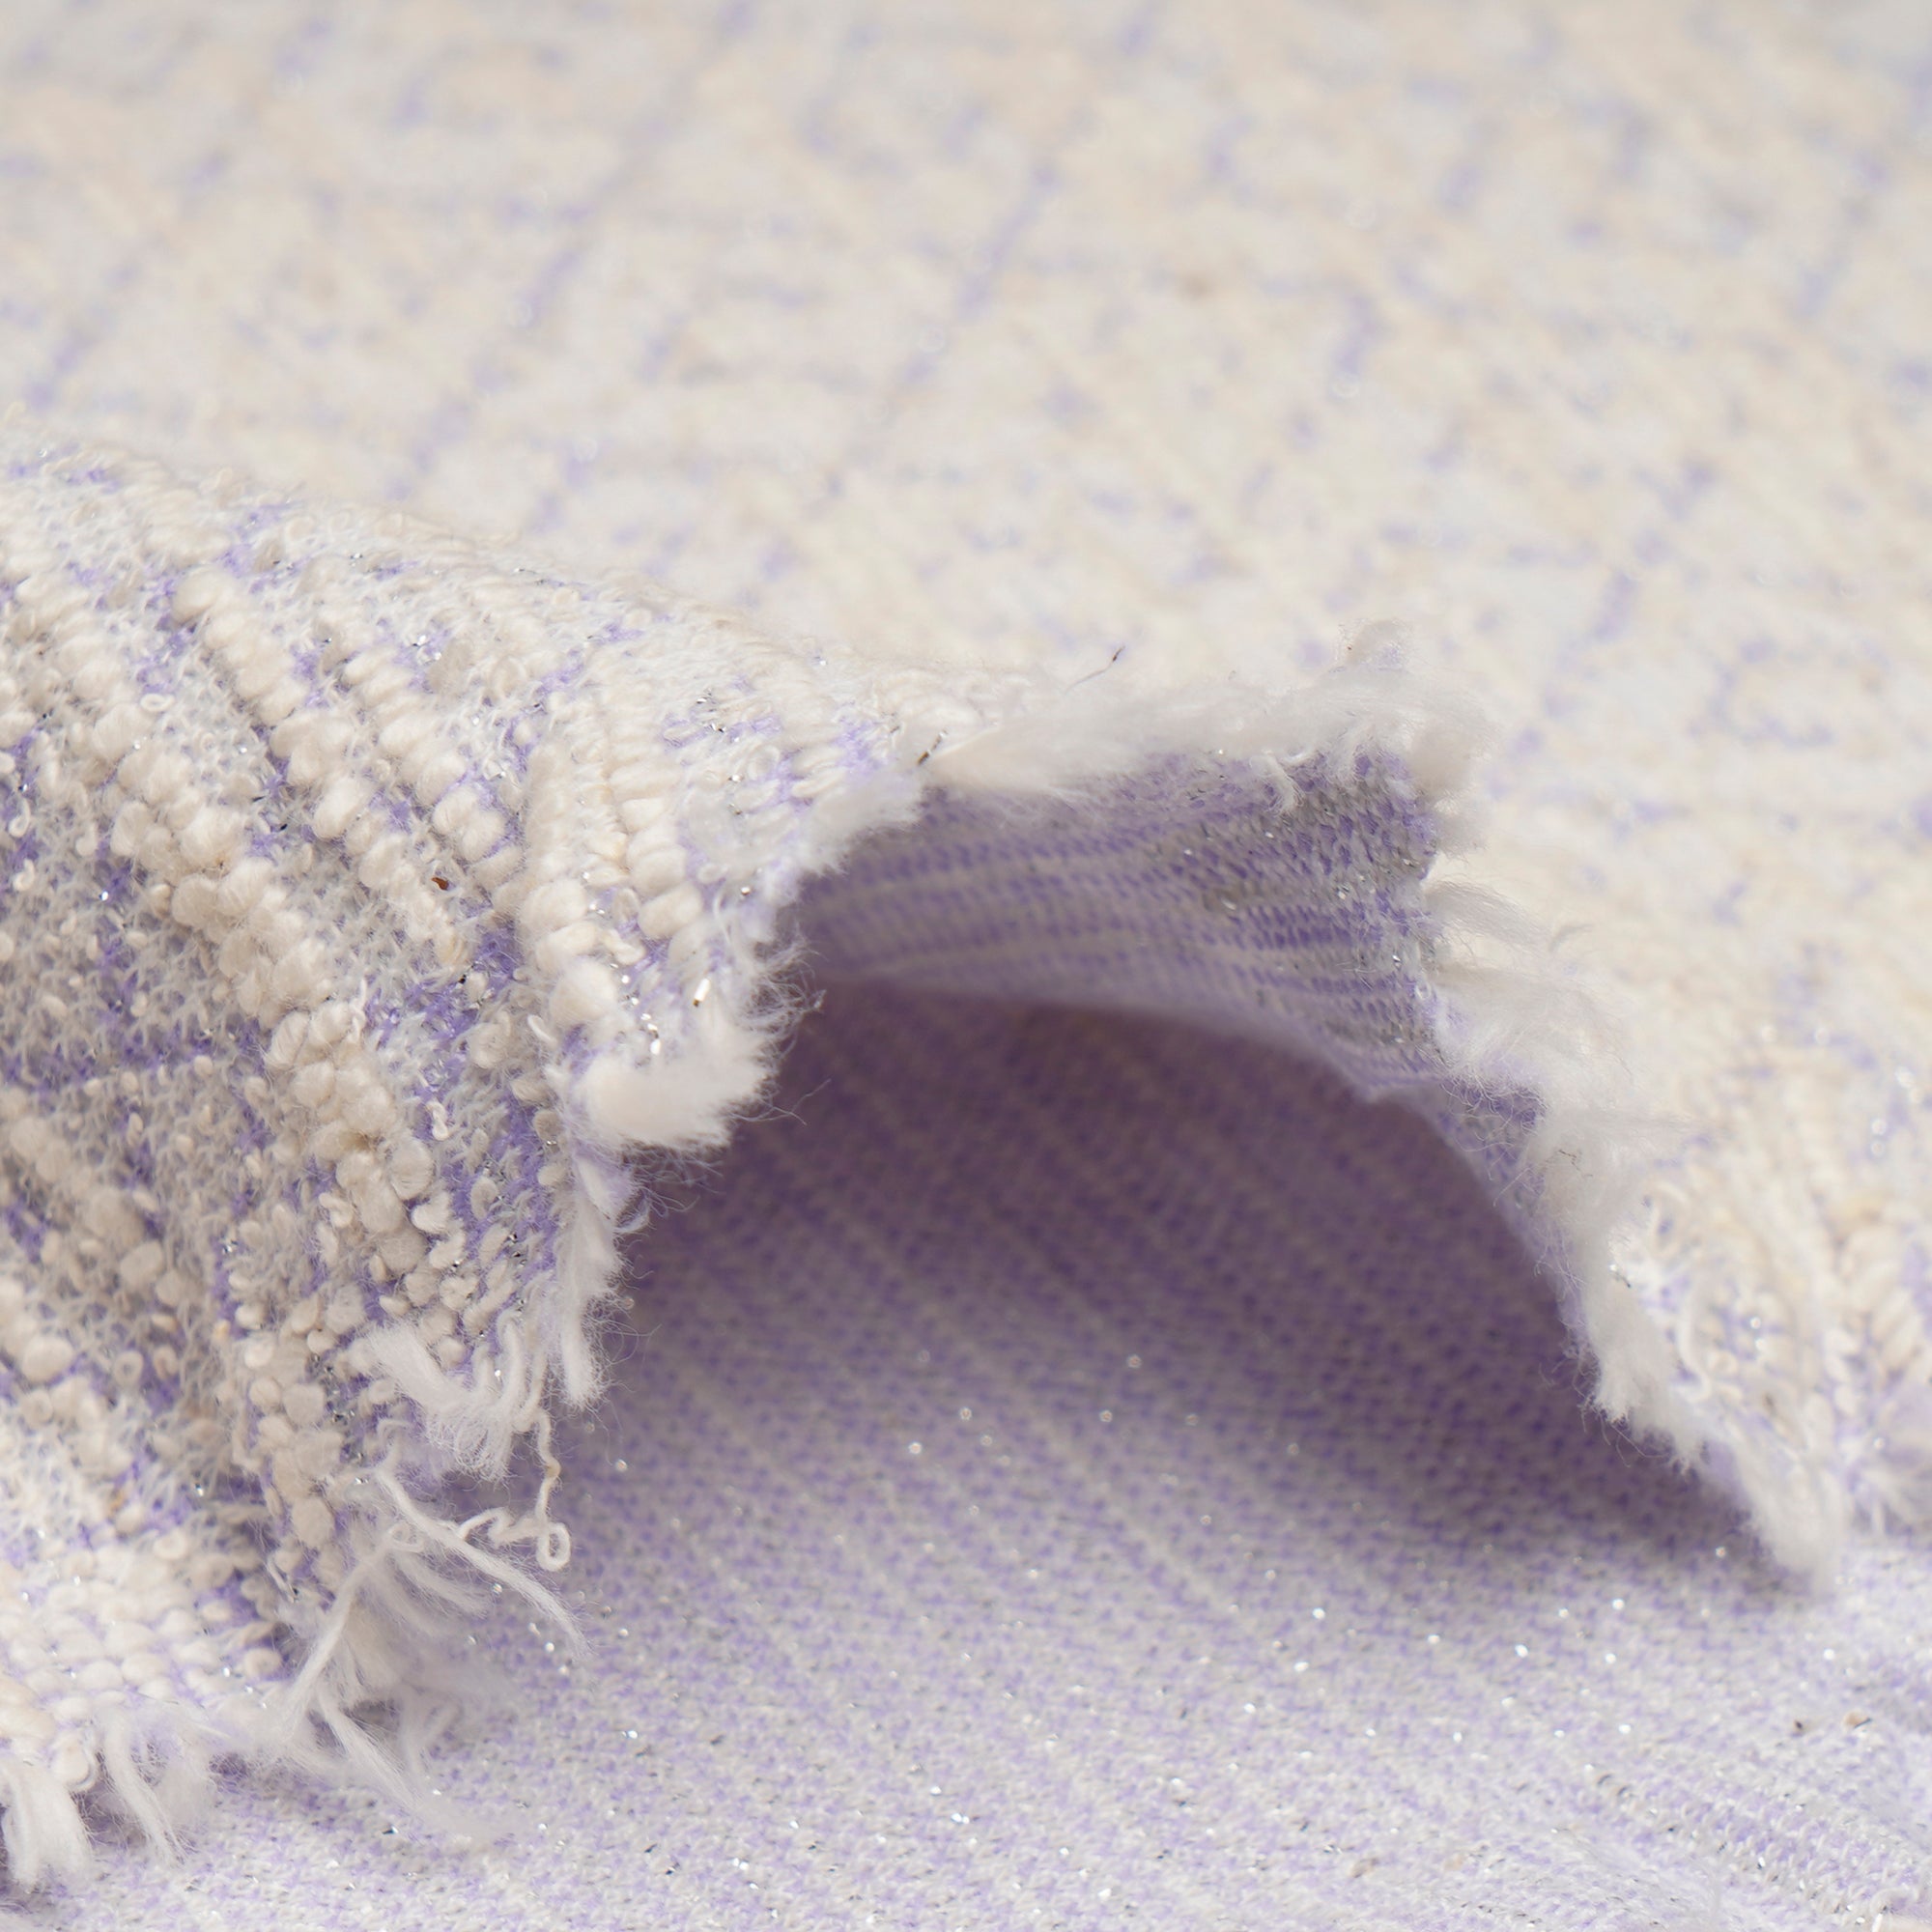 Purple-White Premium Shimmer Imported Stretch Tweed Fabric (60" Width)